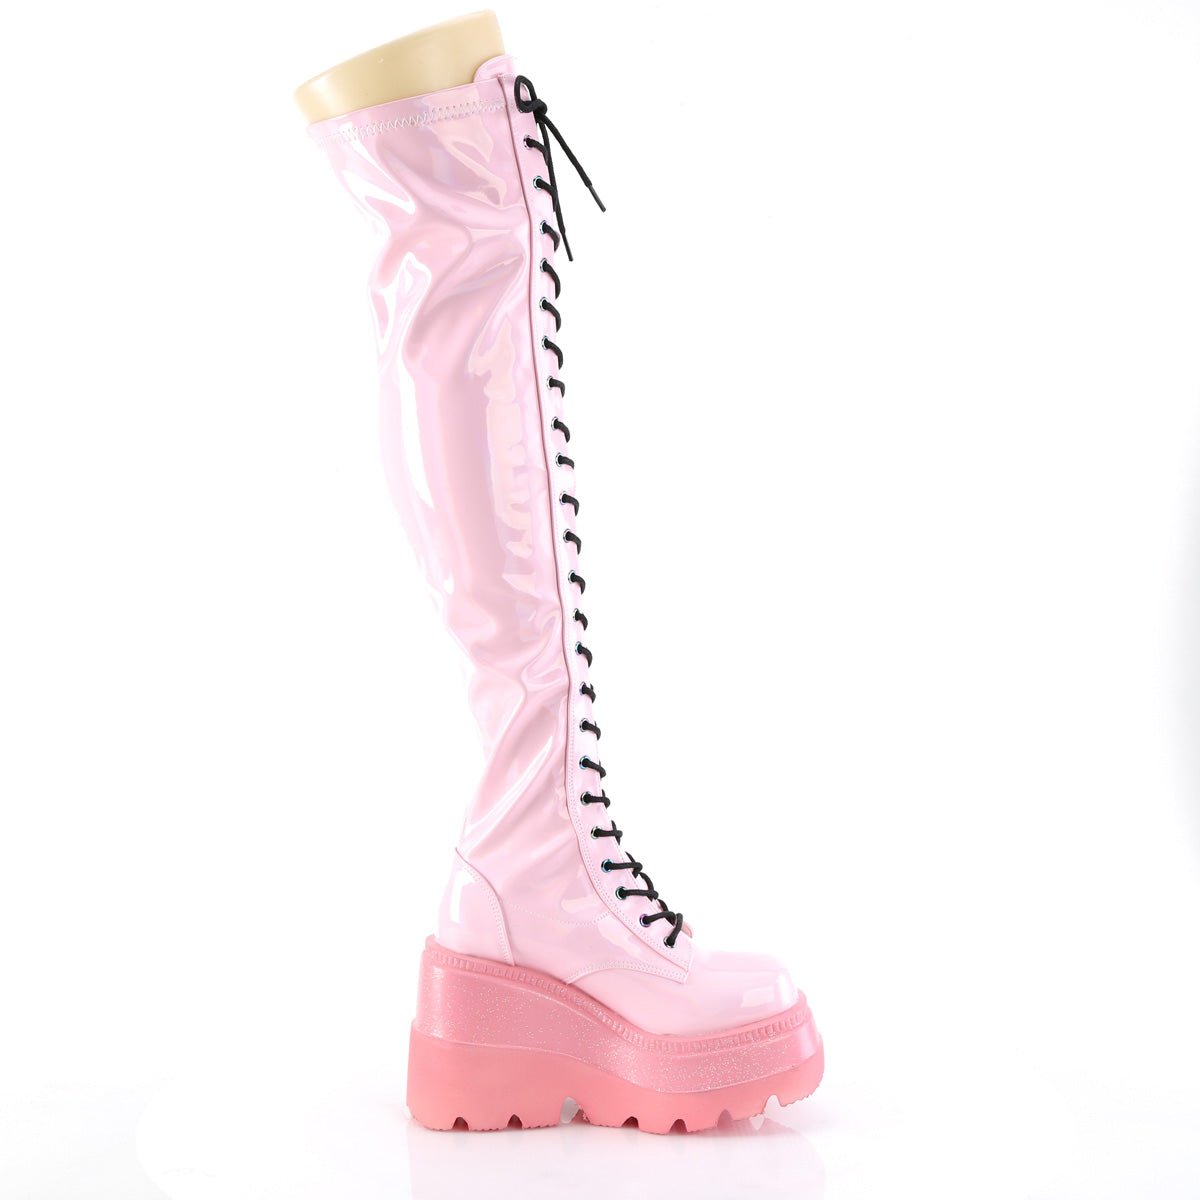 Too Fast | Demonia Shaker 374 1 | Baby Pink Hologram Stretch Patent Leather Women's Over The Knee Boots